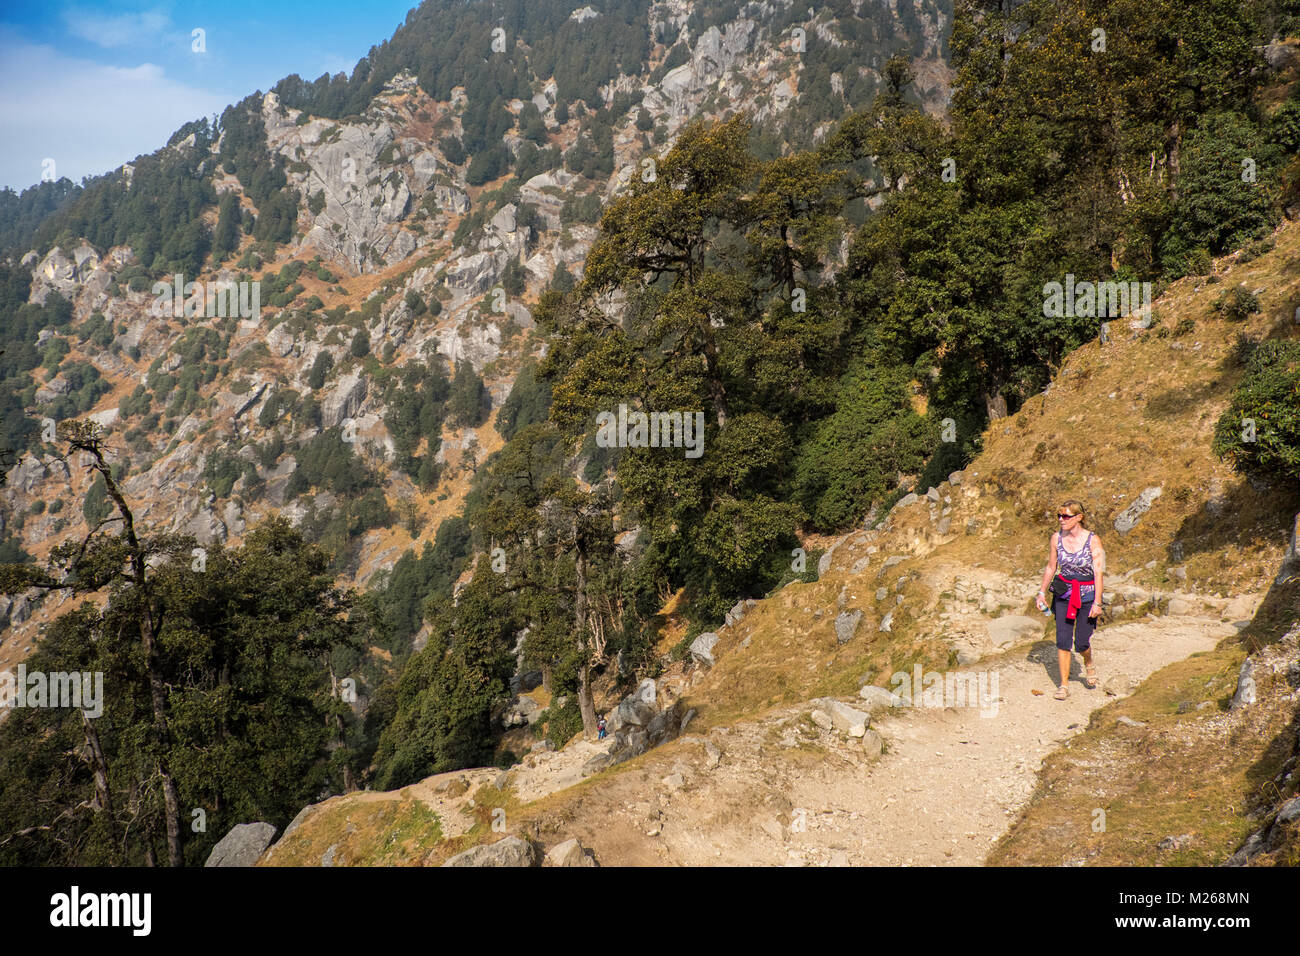 Female western tourist walking on track in the foothills of the Himalayas near Dharamshala, India Stock Photo